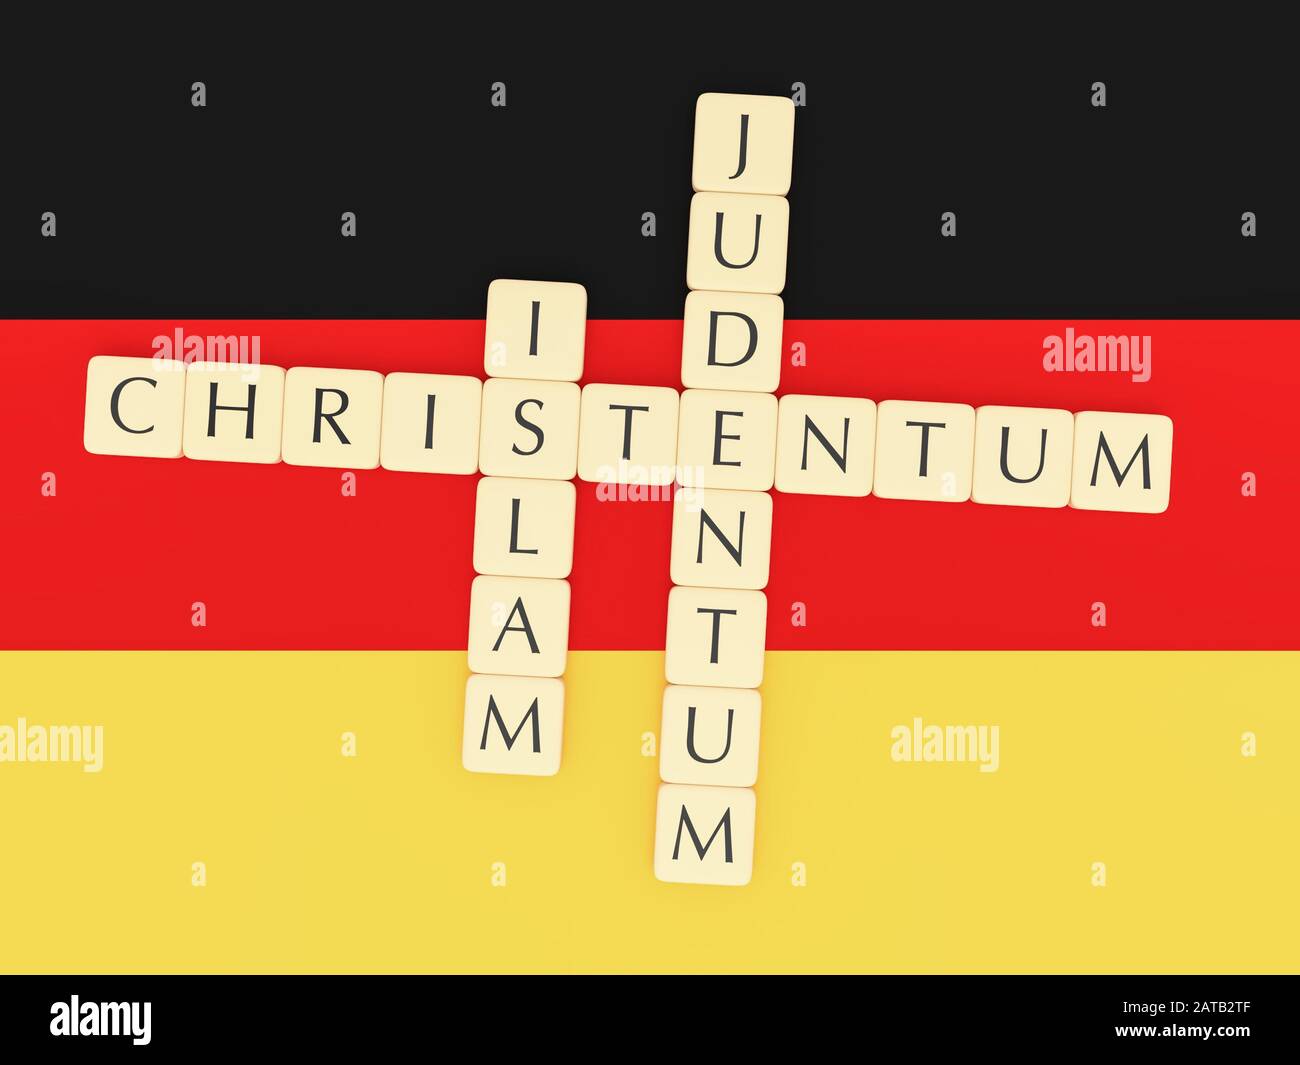 Religion In Germany Concept: Letter Tiles Creating The German Words Islam, Judentum (Judaism), Christentum (Christianity), 3d illustration Stock Photo